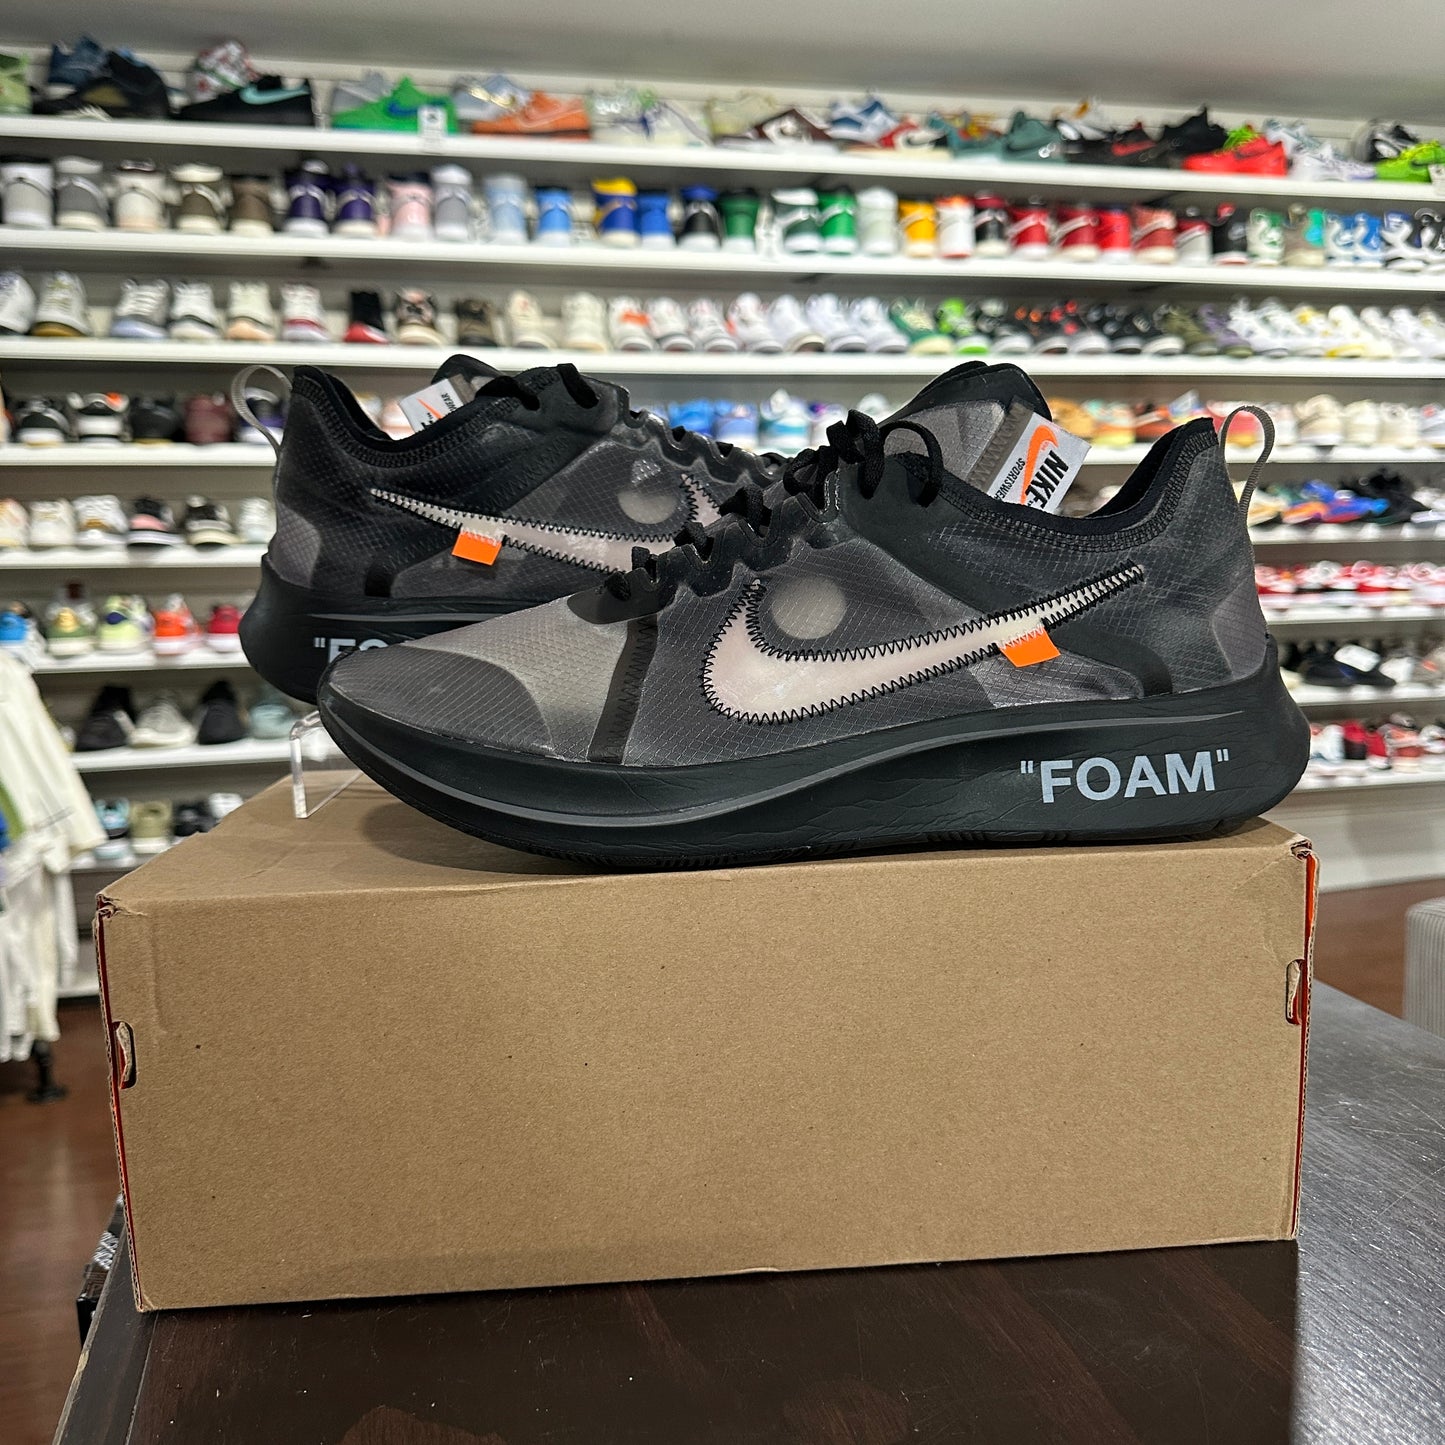 *USED* Nike Off-White Zoom Fly Black Silver (SIZE 14)